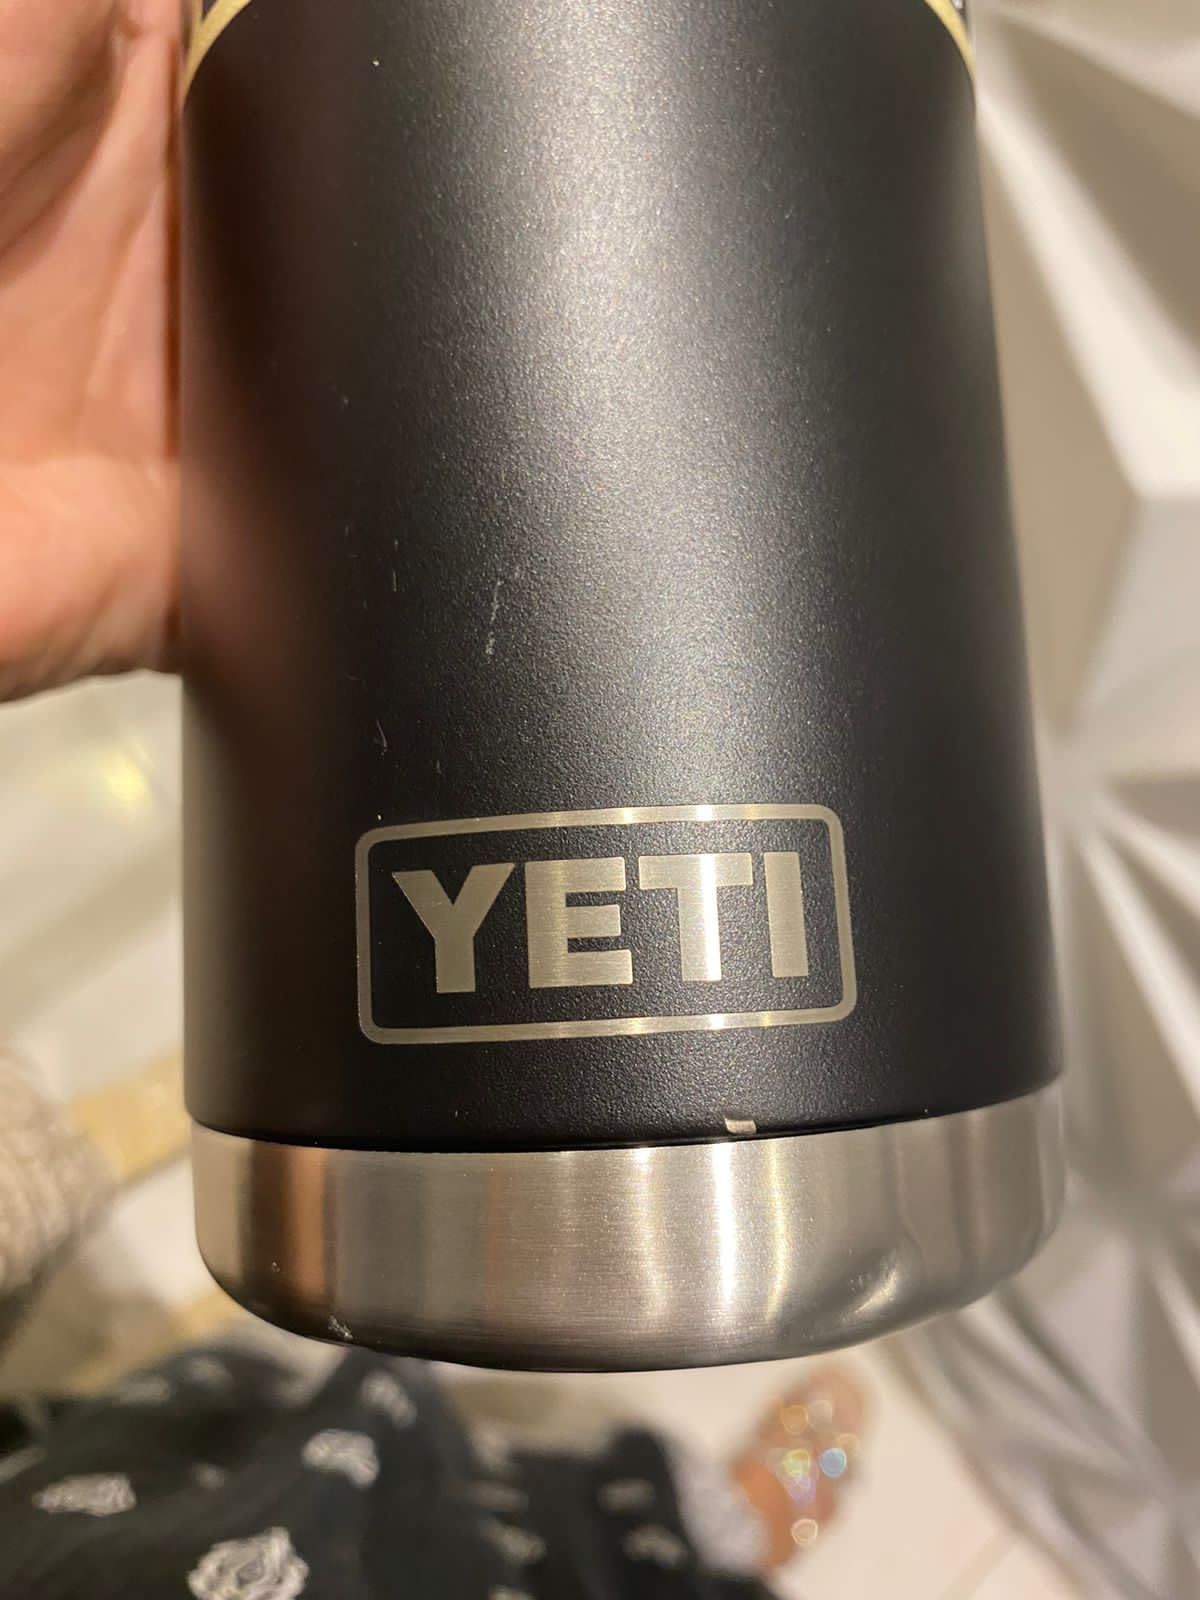 YETI Rambler 26 oz Bottle, Vacuum Insulated, Stainless Steel with Straw Cap, Canopy Green | Amazon (US)